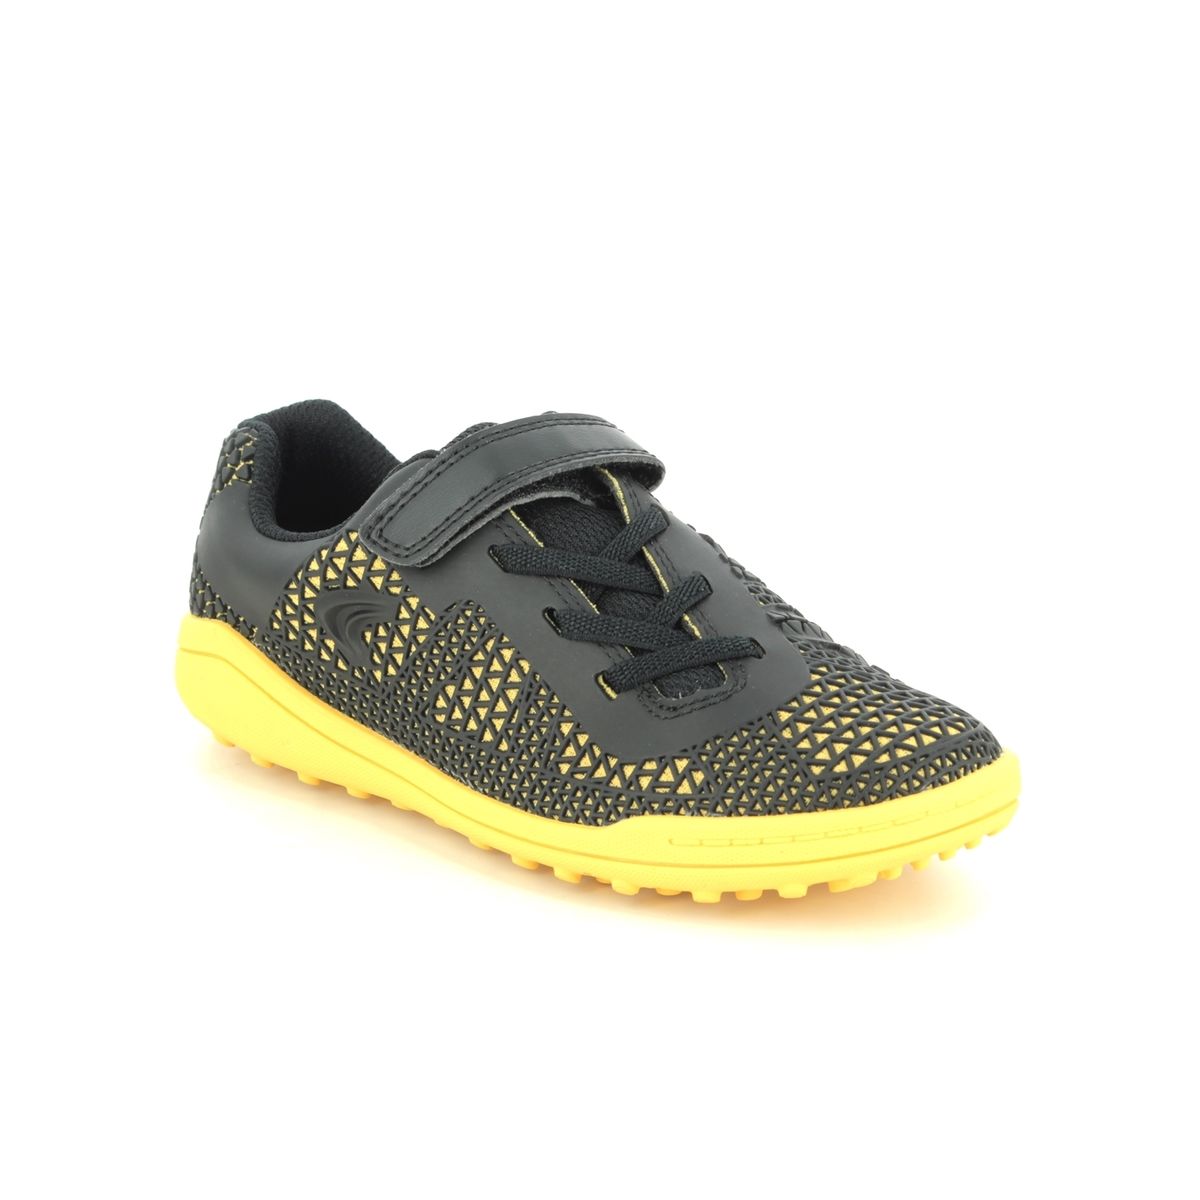 Clarks Award Swift K Black Yellow Kids Boys Trainers 5391-87G in a Plain Man-made in Size 11.5